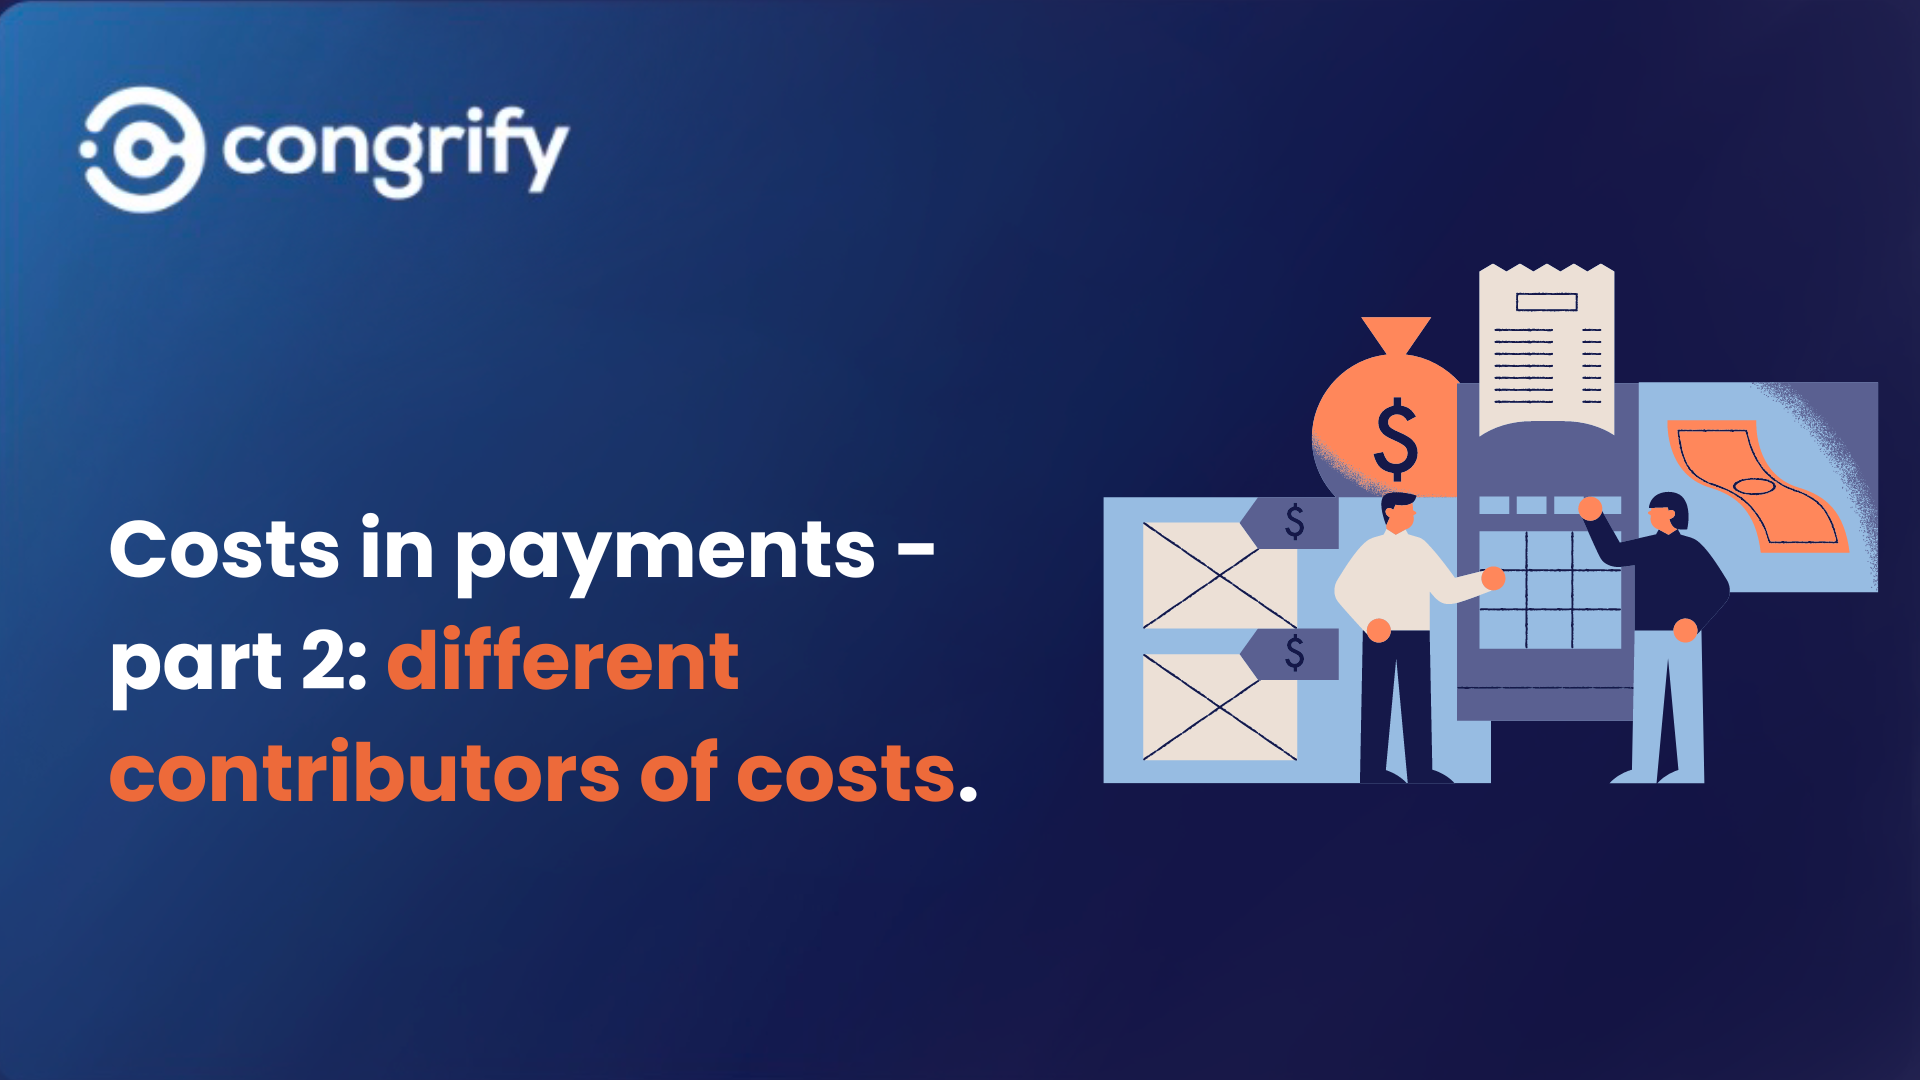 Learn about the different contributors of costs in the payment industry and factors in the category